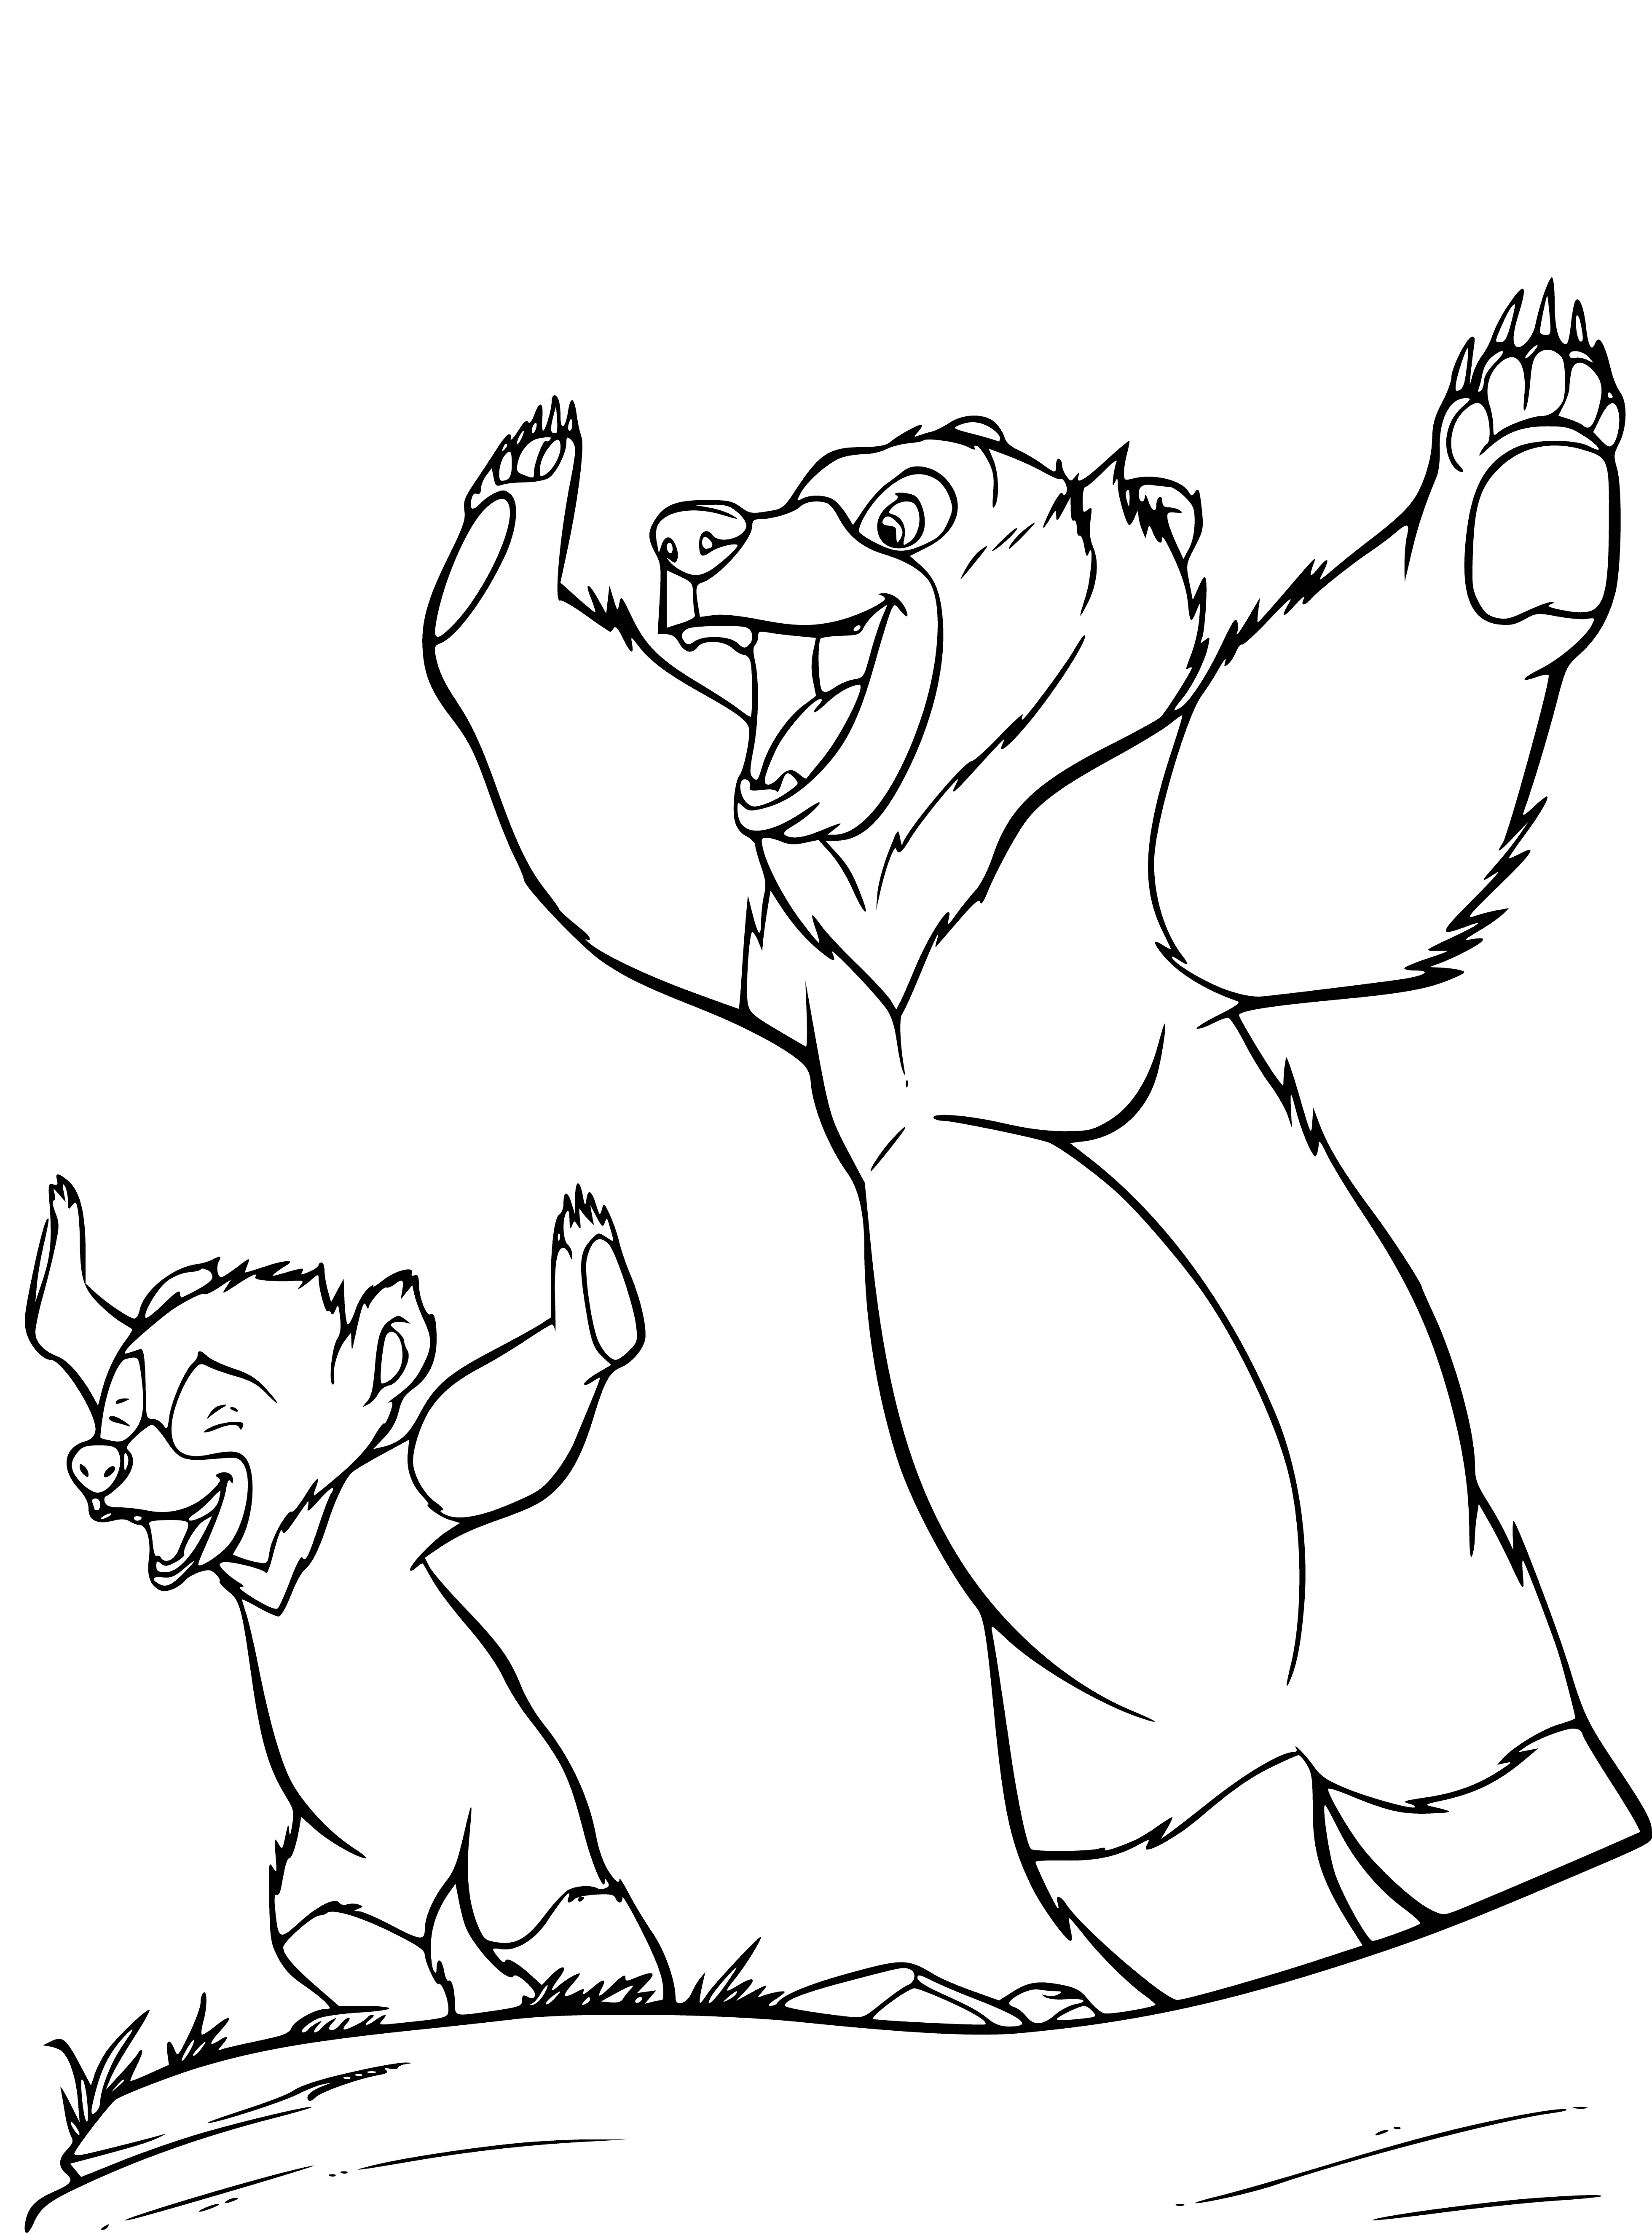 coloring page: Two bears in a conversation: light & dark brown, mouths open & tongues out!